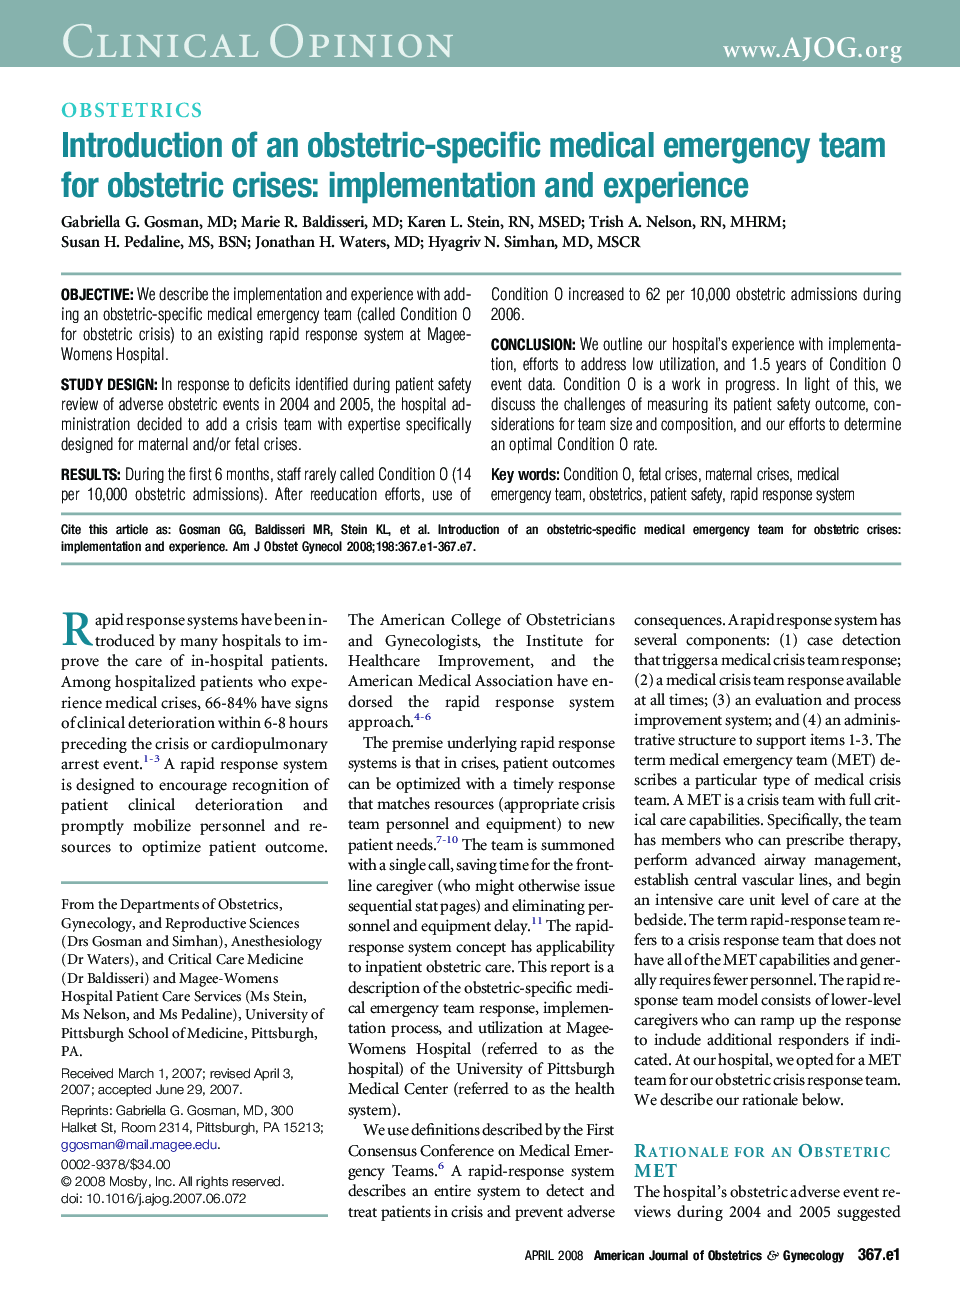 Introduction of an obstetric-specific medical emergency team for obstetric crises: implementation and experience